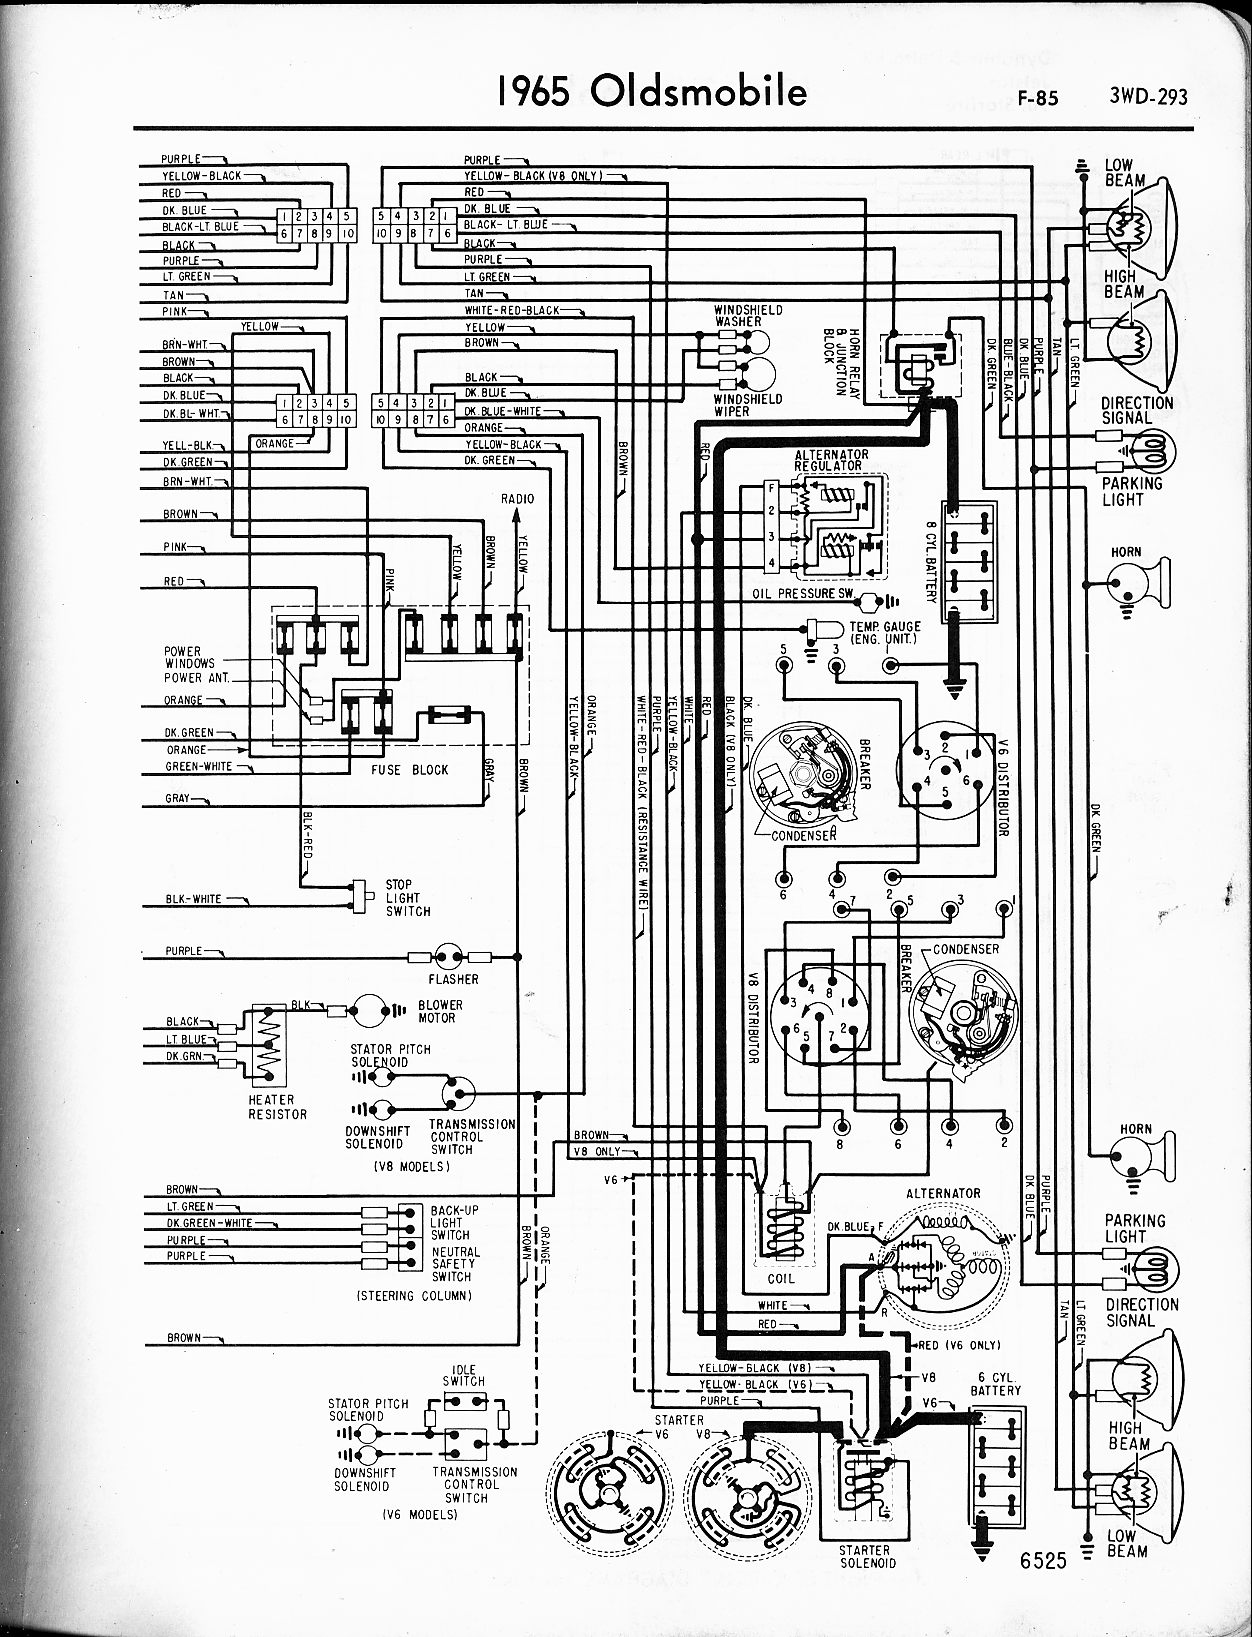 Oldsmobile Wiring Diagrams The Old